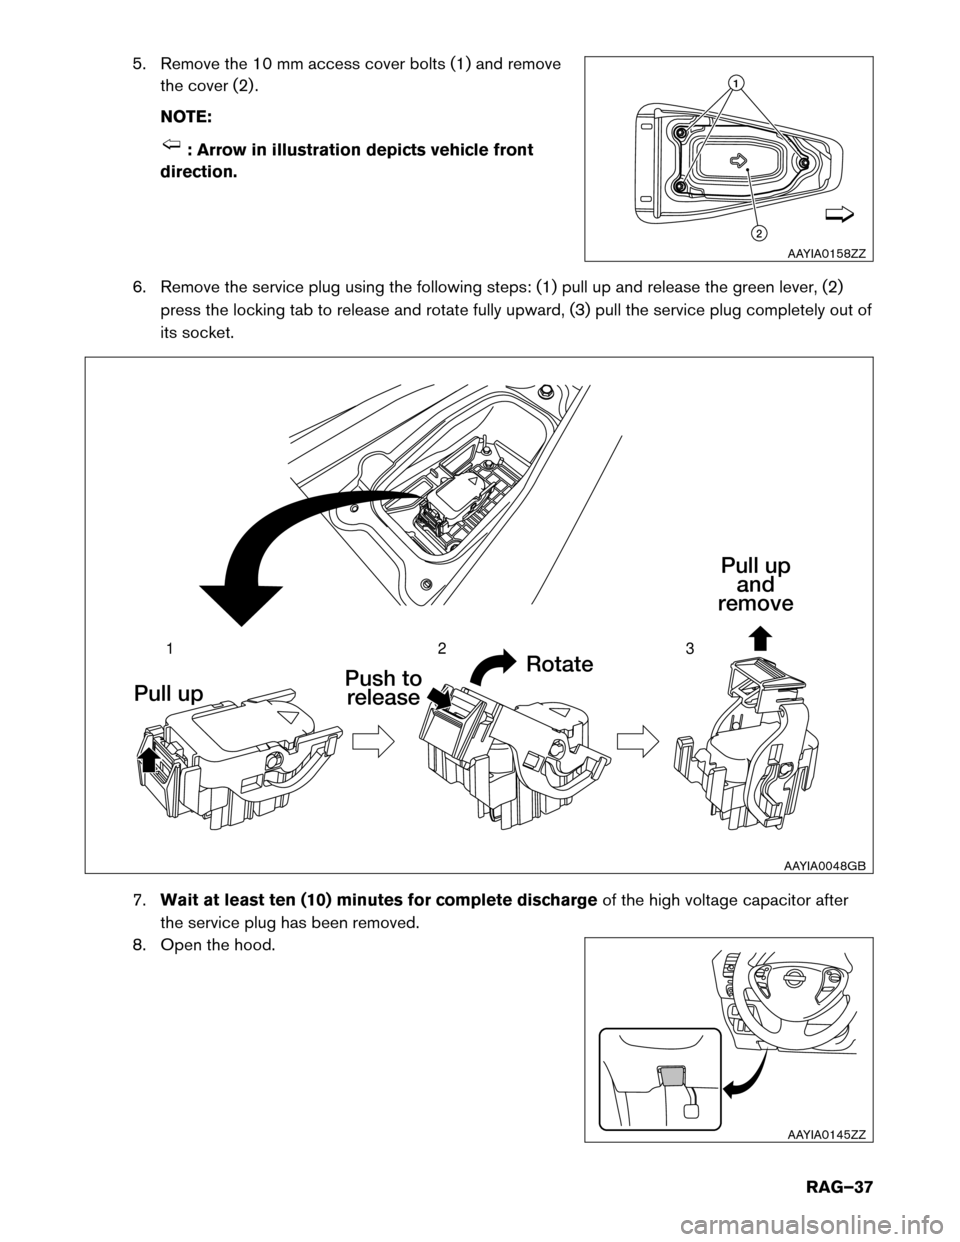 NISSAN LEAF 2015 1.G Roadside Assistance Guide 5. Remove the 10 mm access cover bolts (1) and remove
the cover (2) .
NOTE: : Arrow in illustration depicts vehicle front
direction.
6.

Remove the service plug using the following steps: (1) pull up 